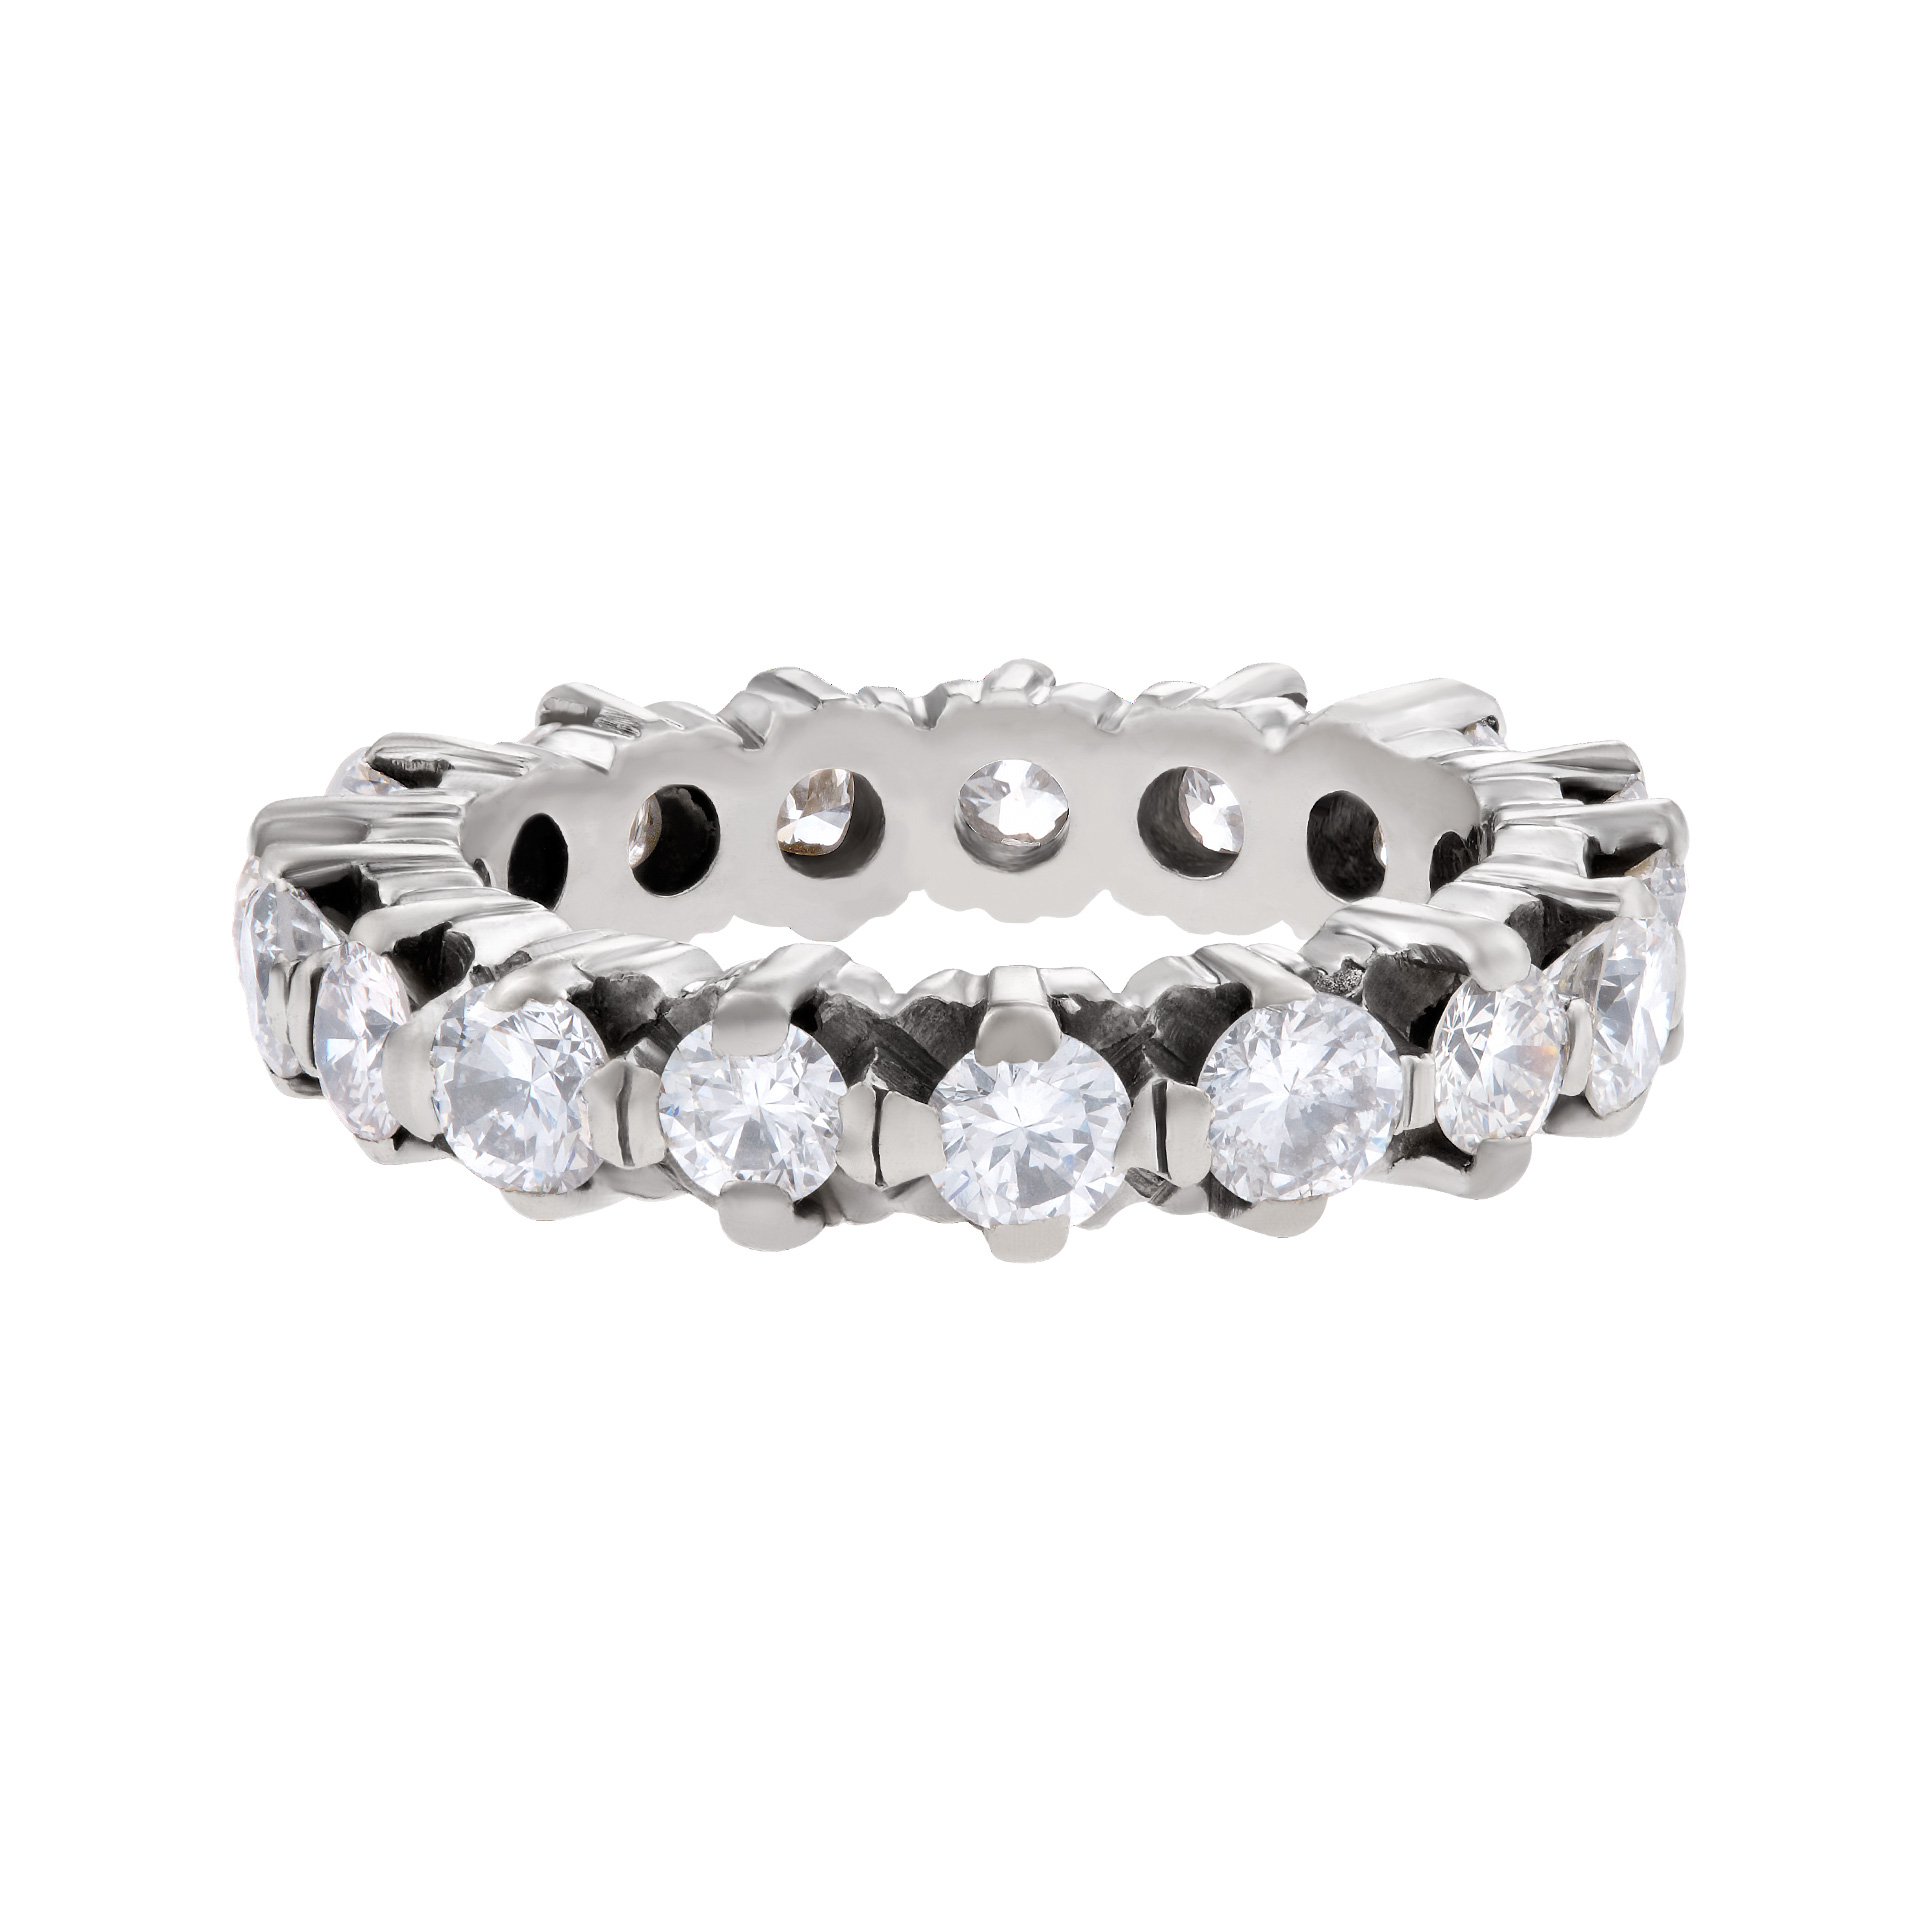 Eternity band in 18k white gold approx 2.5 cts in diamonds H-I color, SI1 clarity